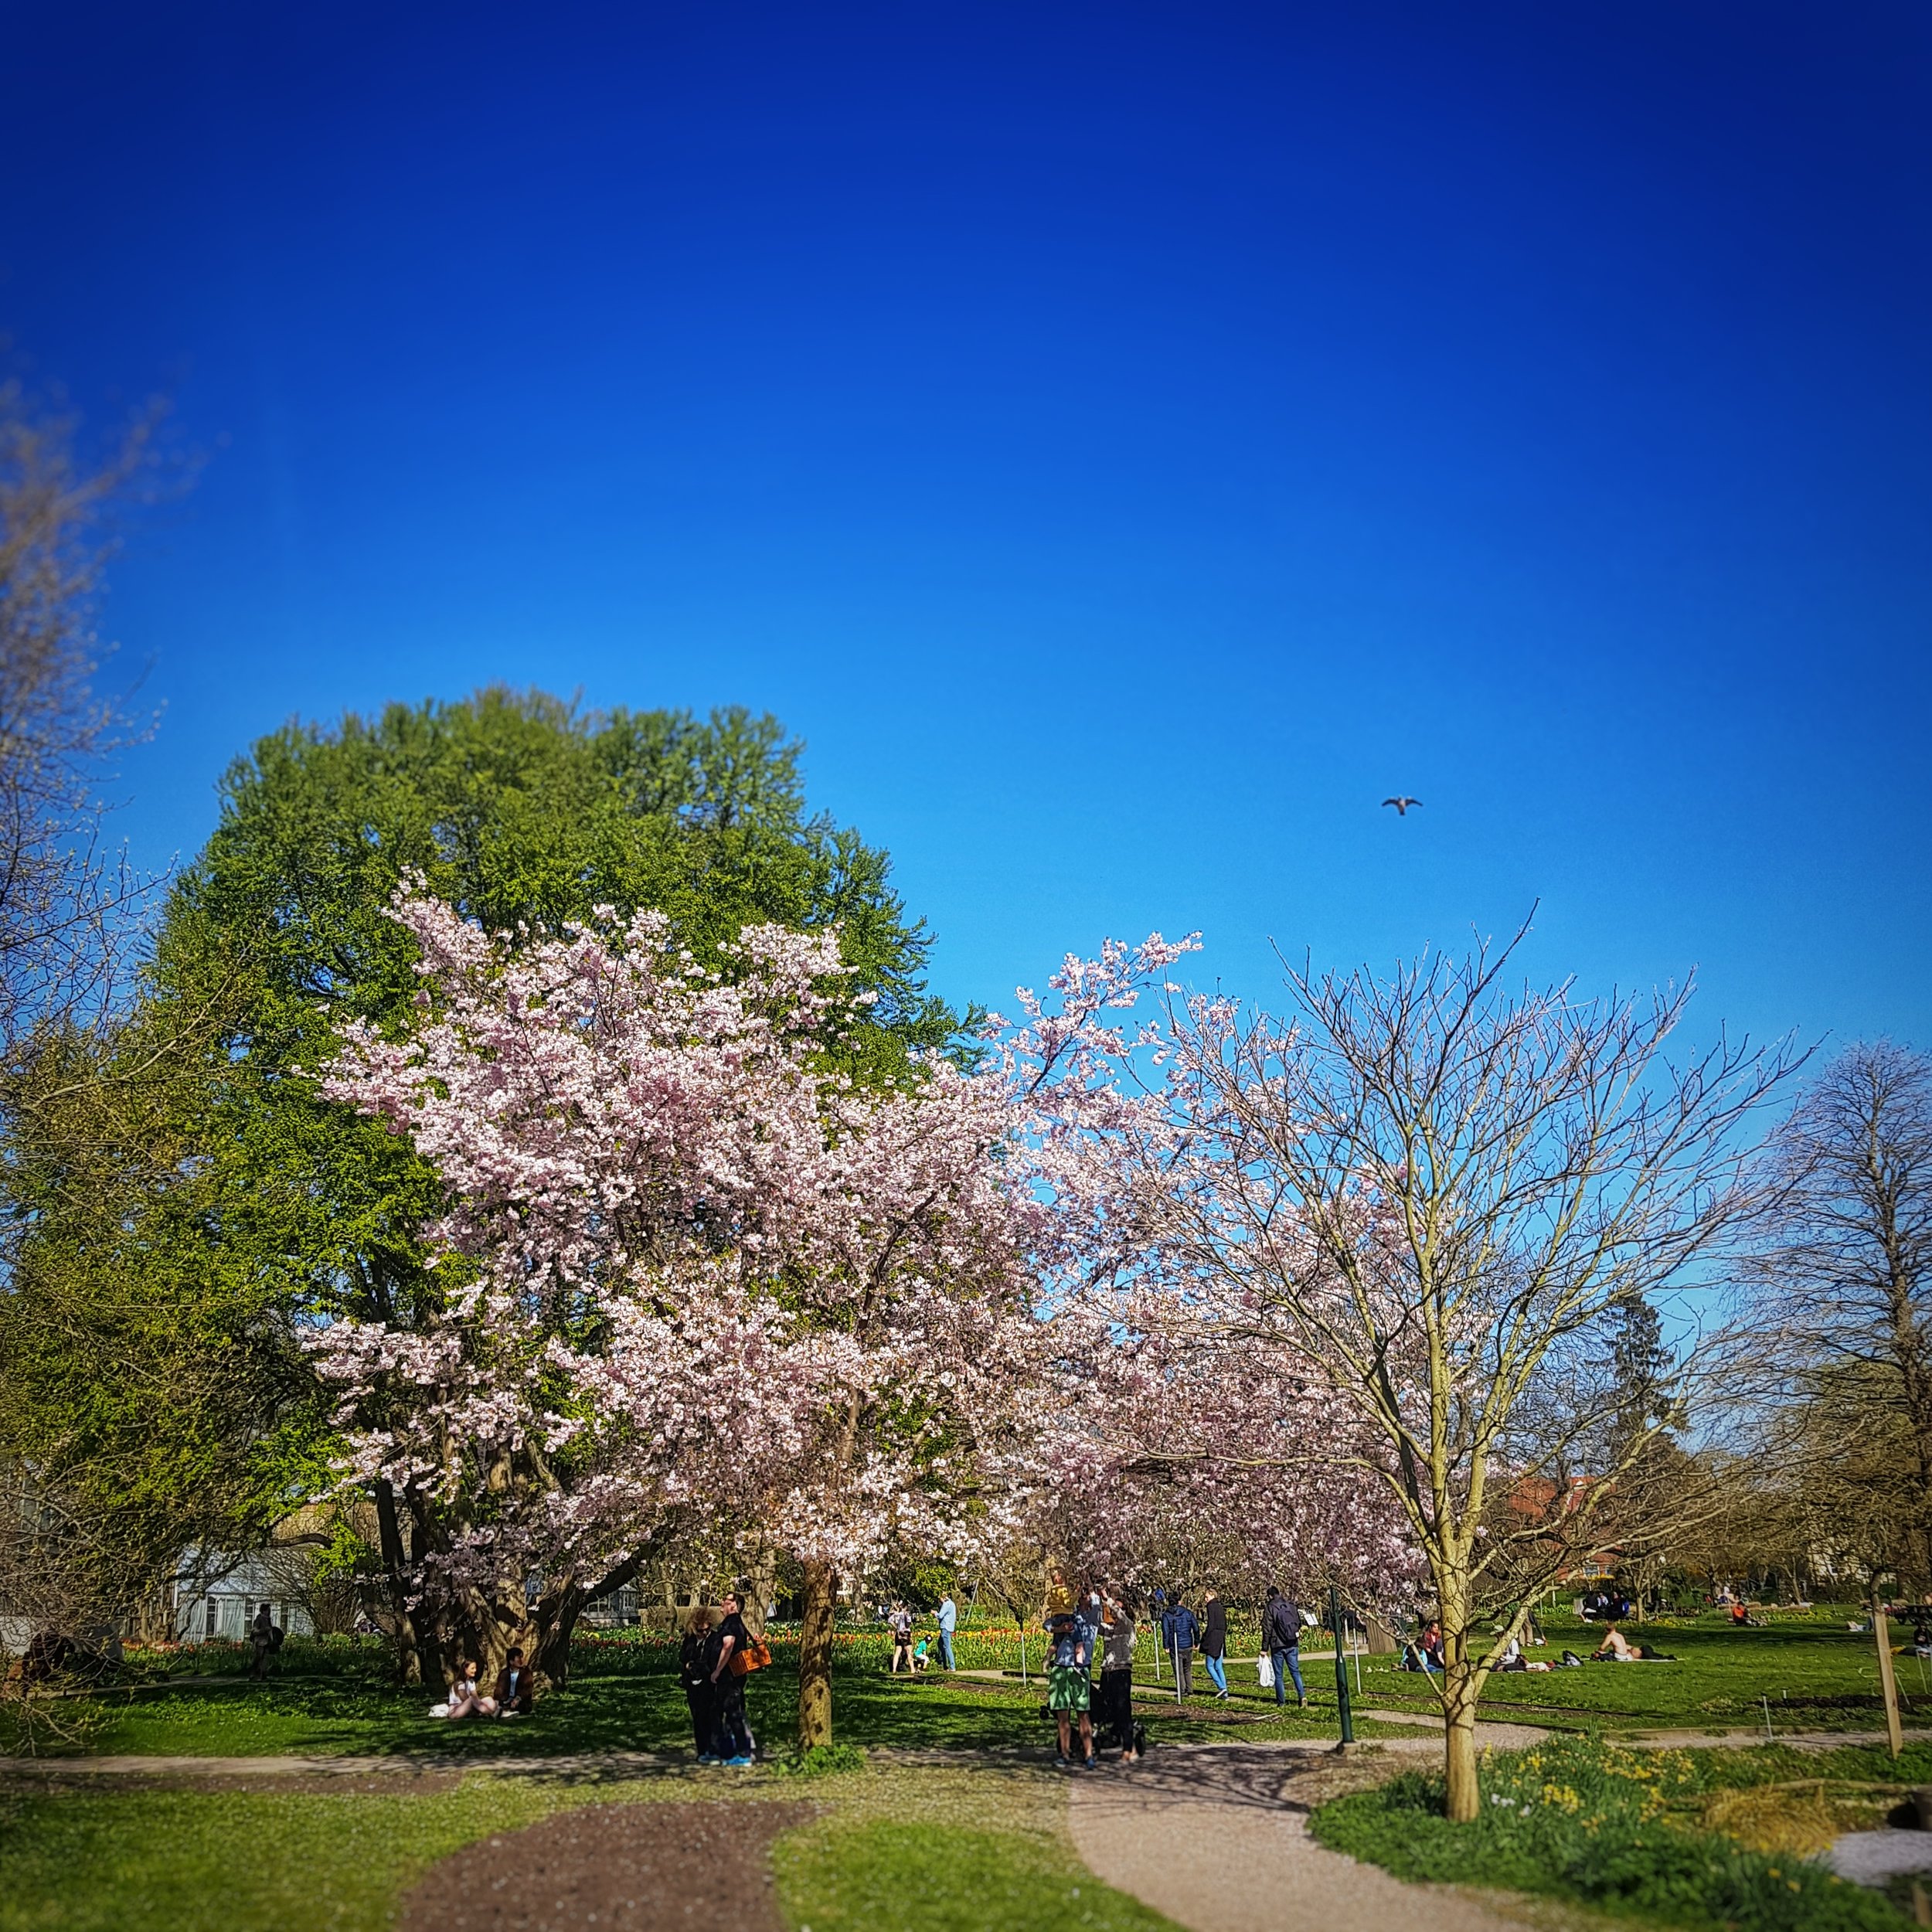 Day 111 - April 21: Under the cherry trees